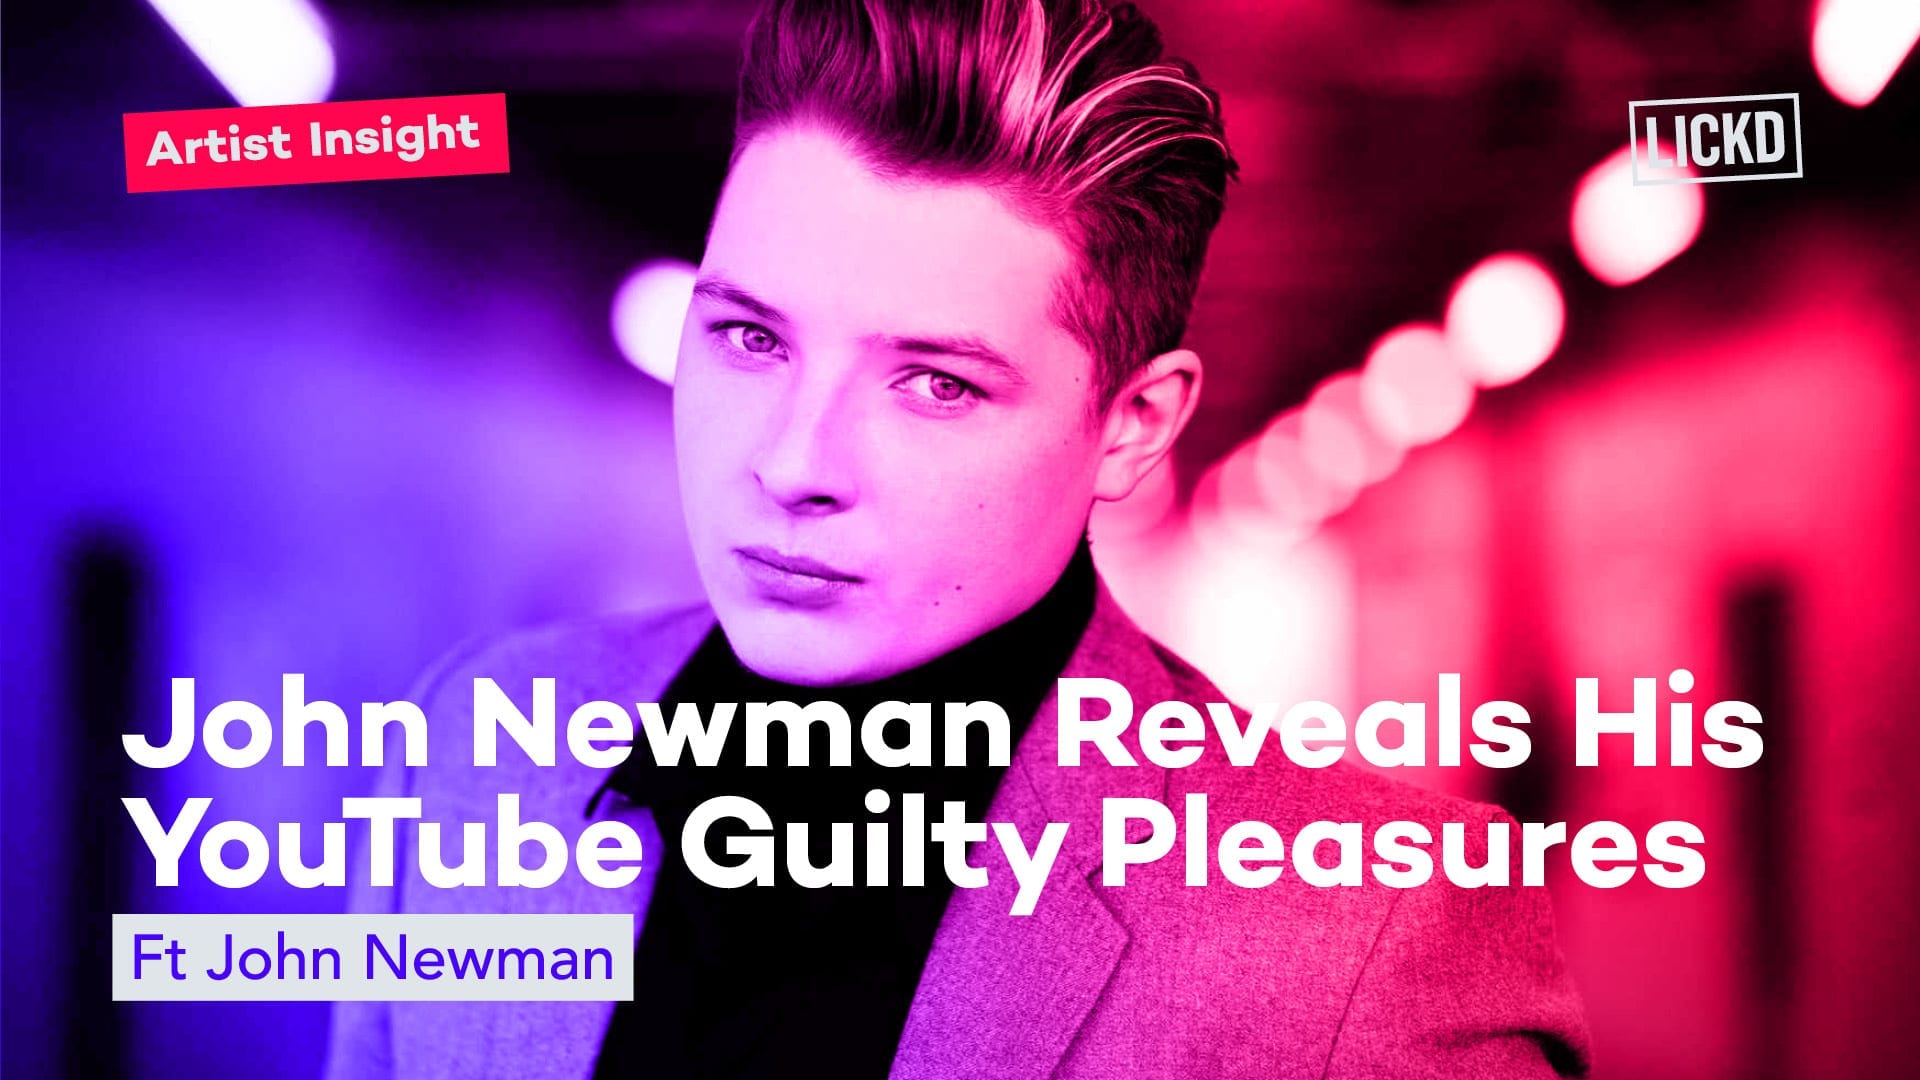 John Newman’s YouTube guilty pleasures – exclusive interview with Lickd